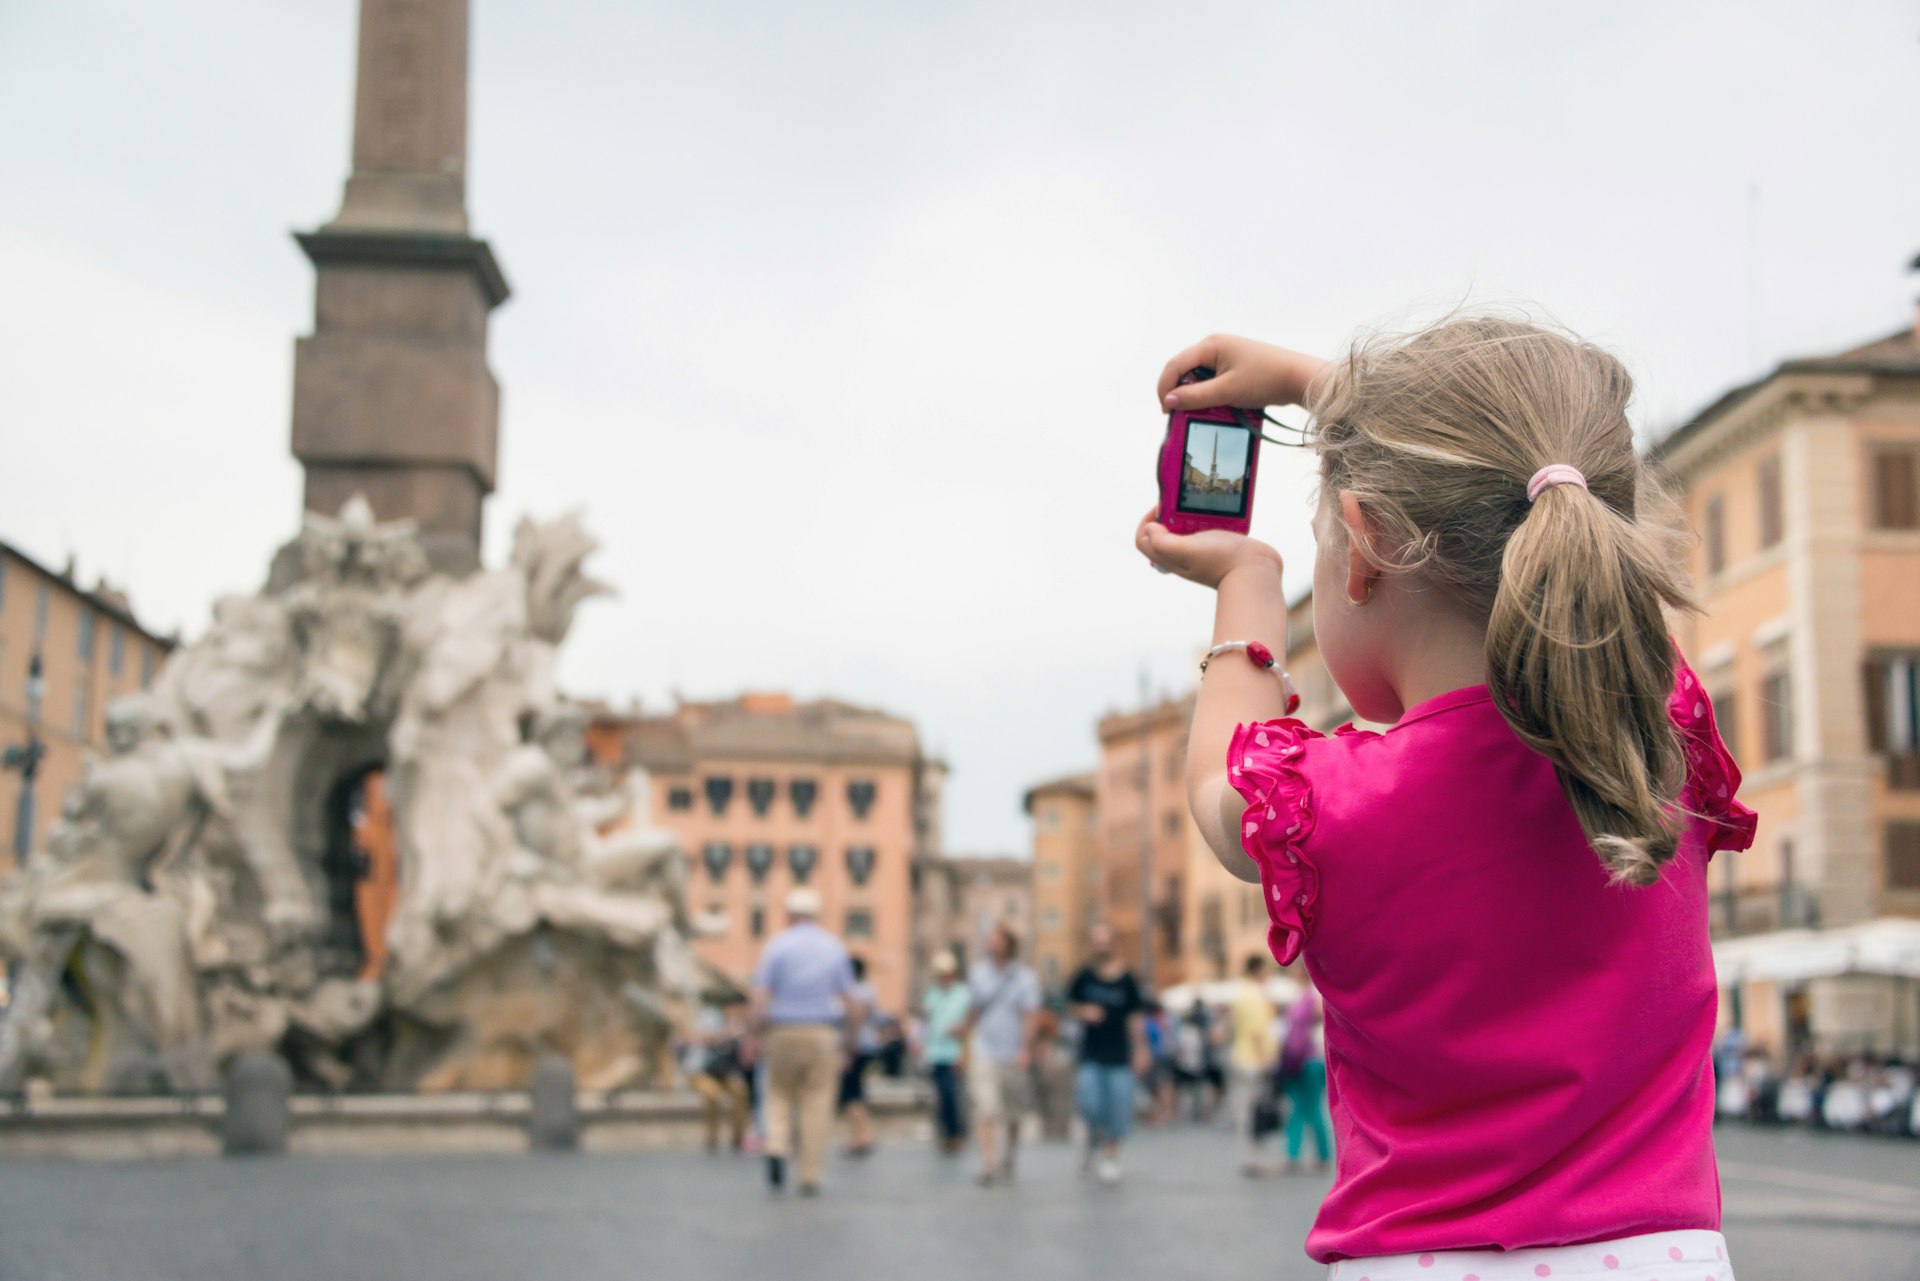 Horizontal image of a 6-year-old girl in a pink shirt taking photos in Navona square, Rome, Italy.